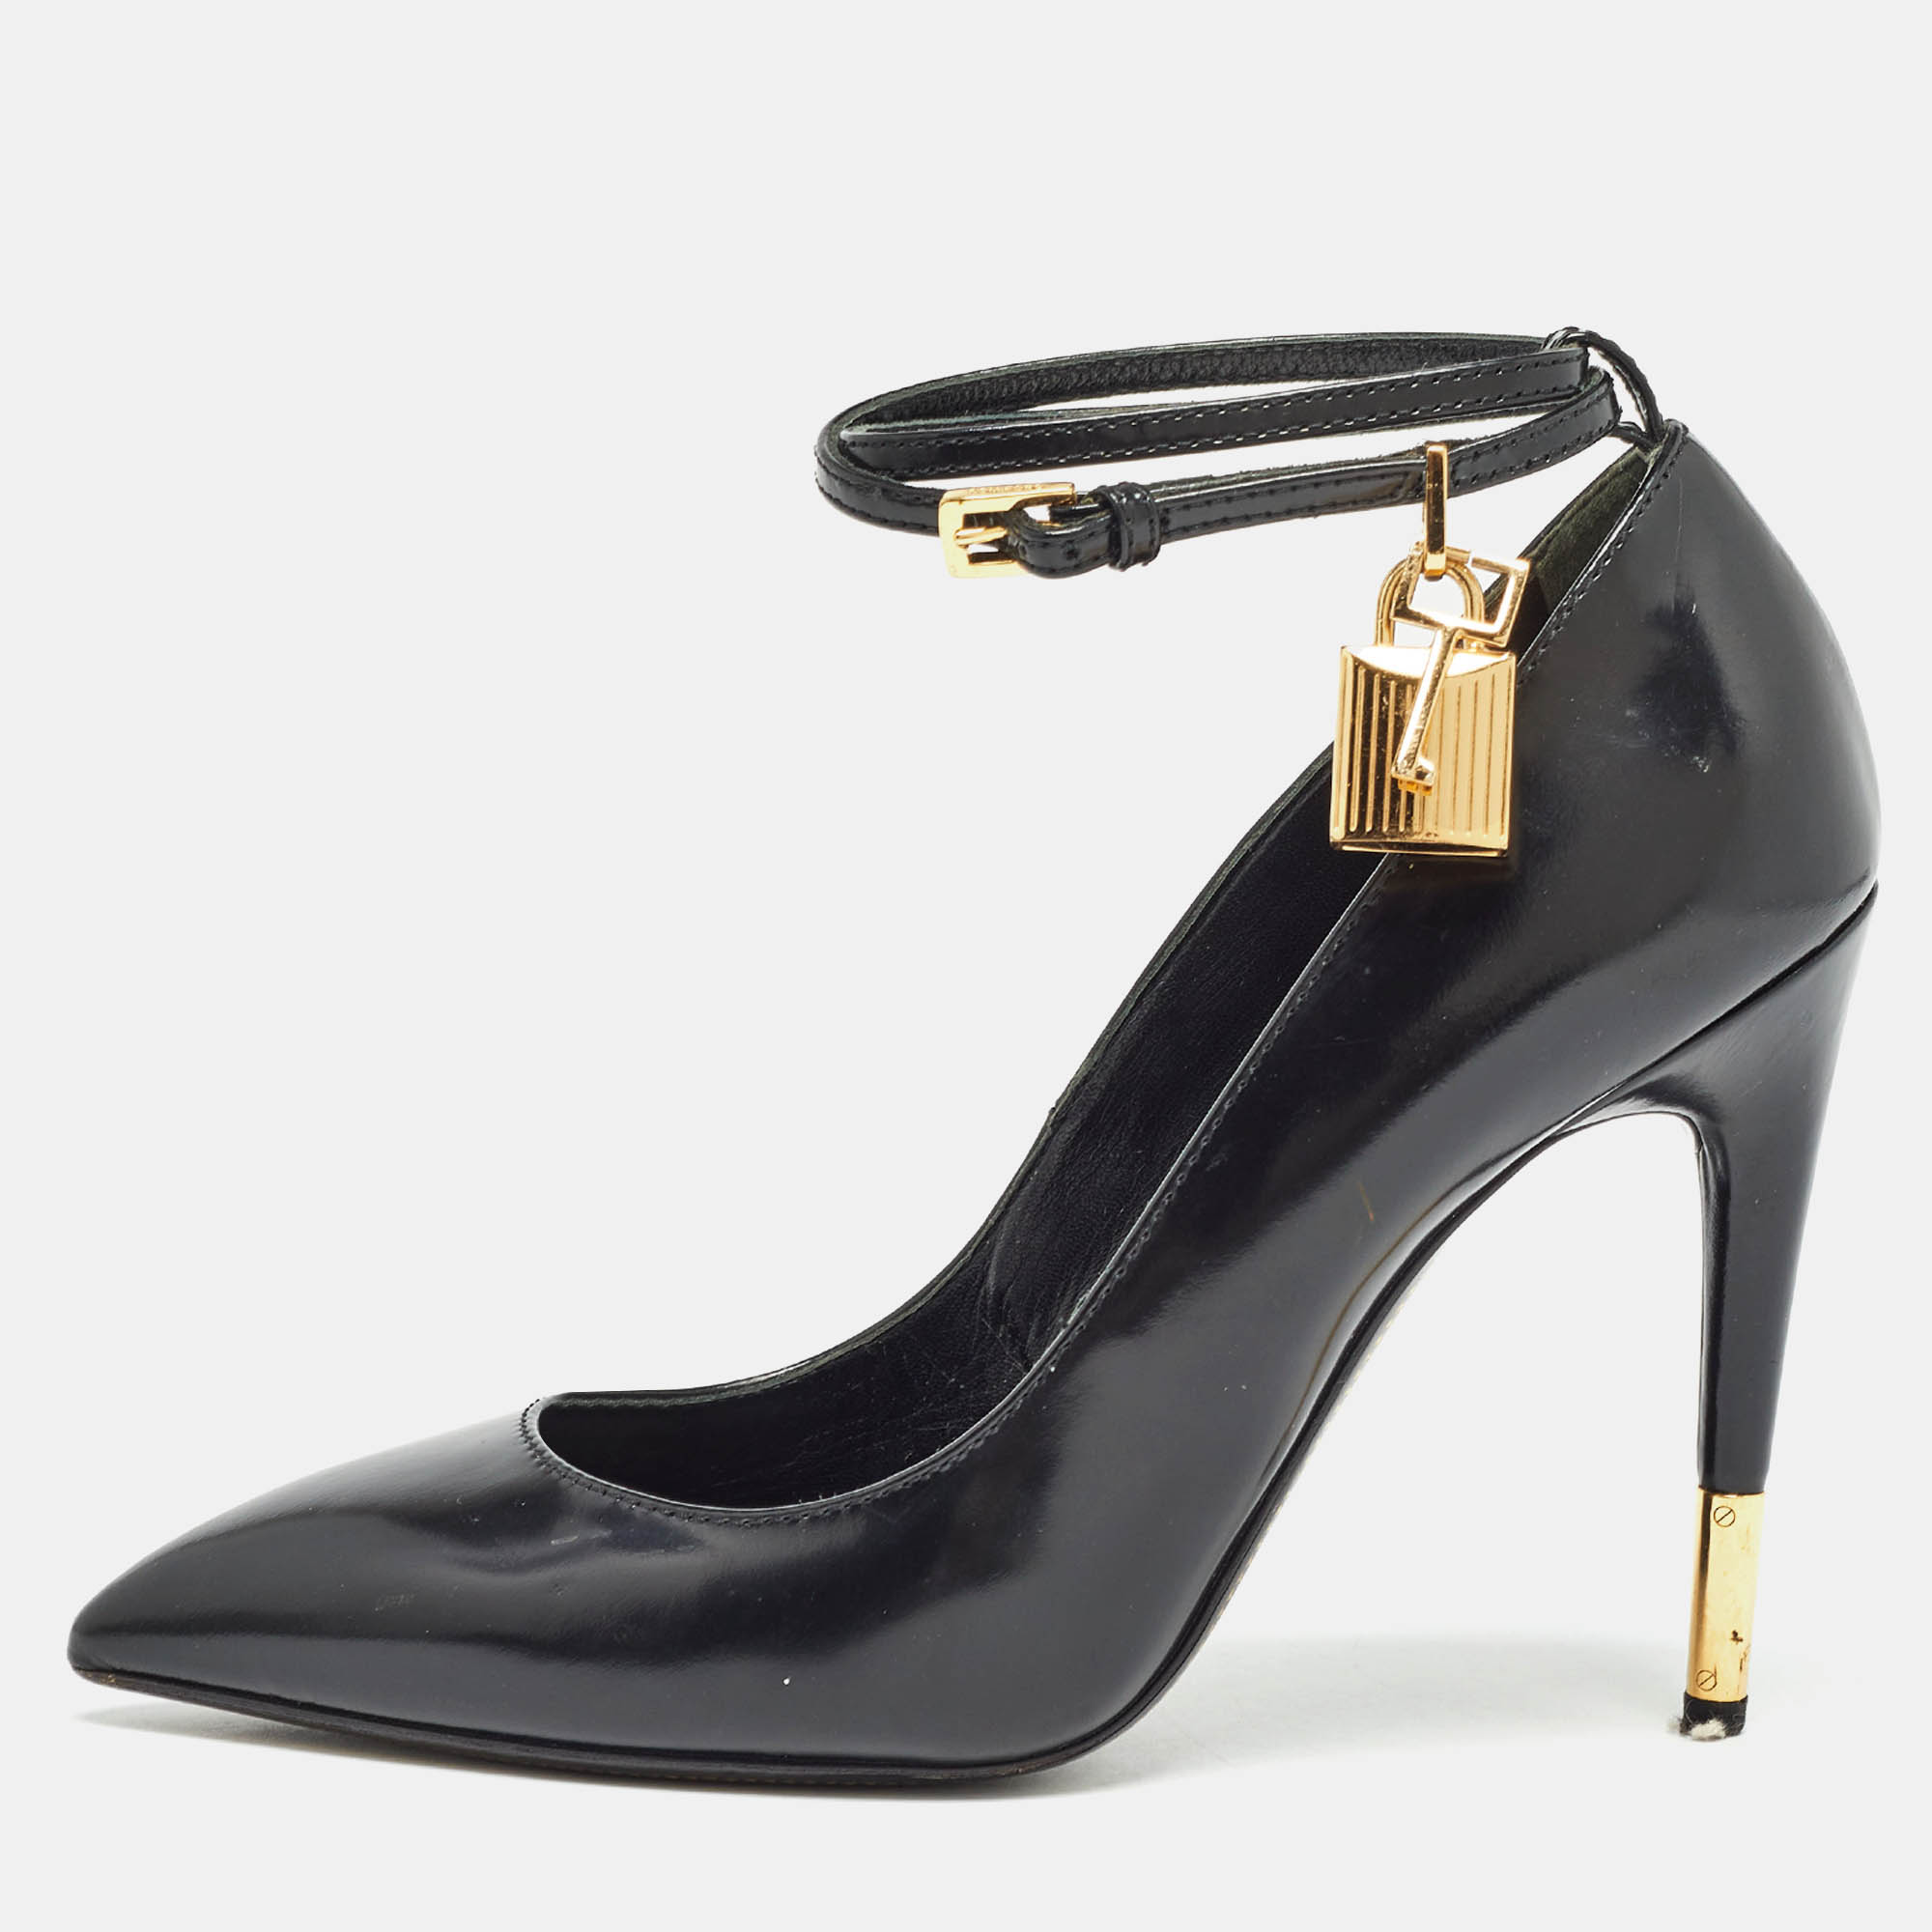 Tom ford black glossy leather padlock pumps size 37